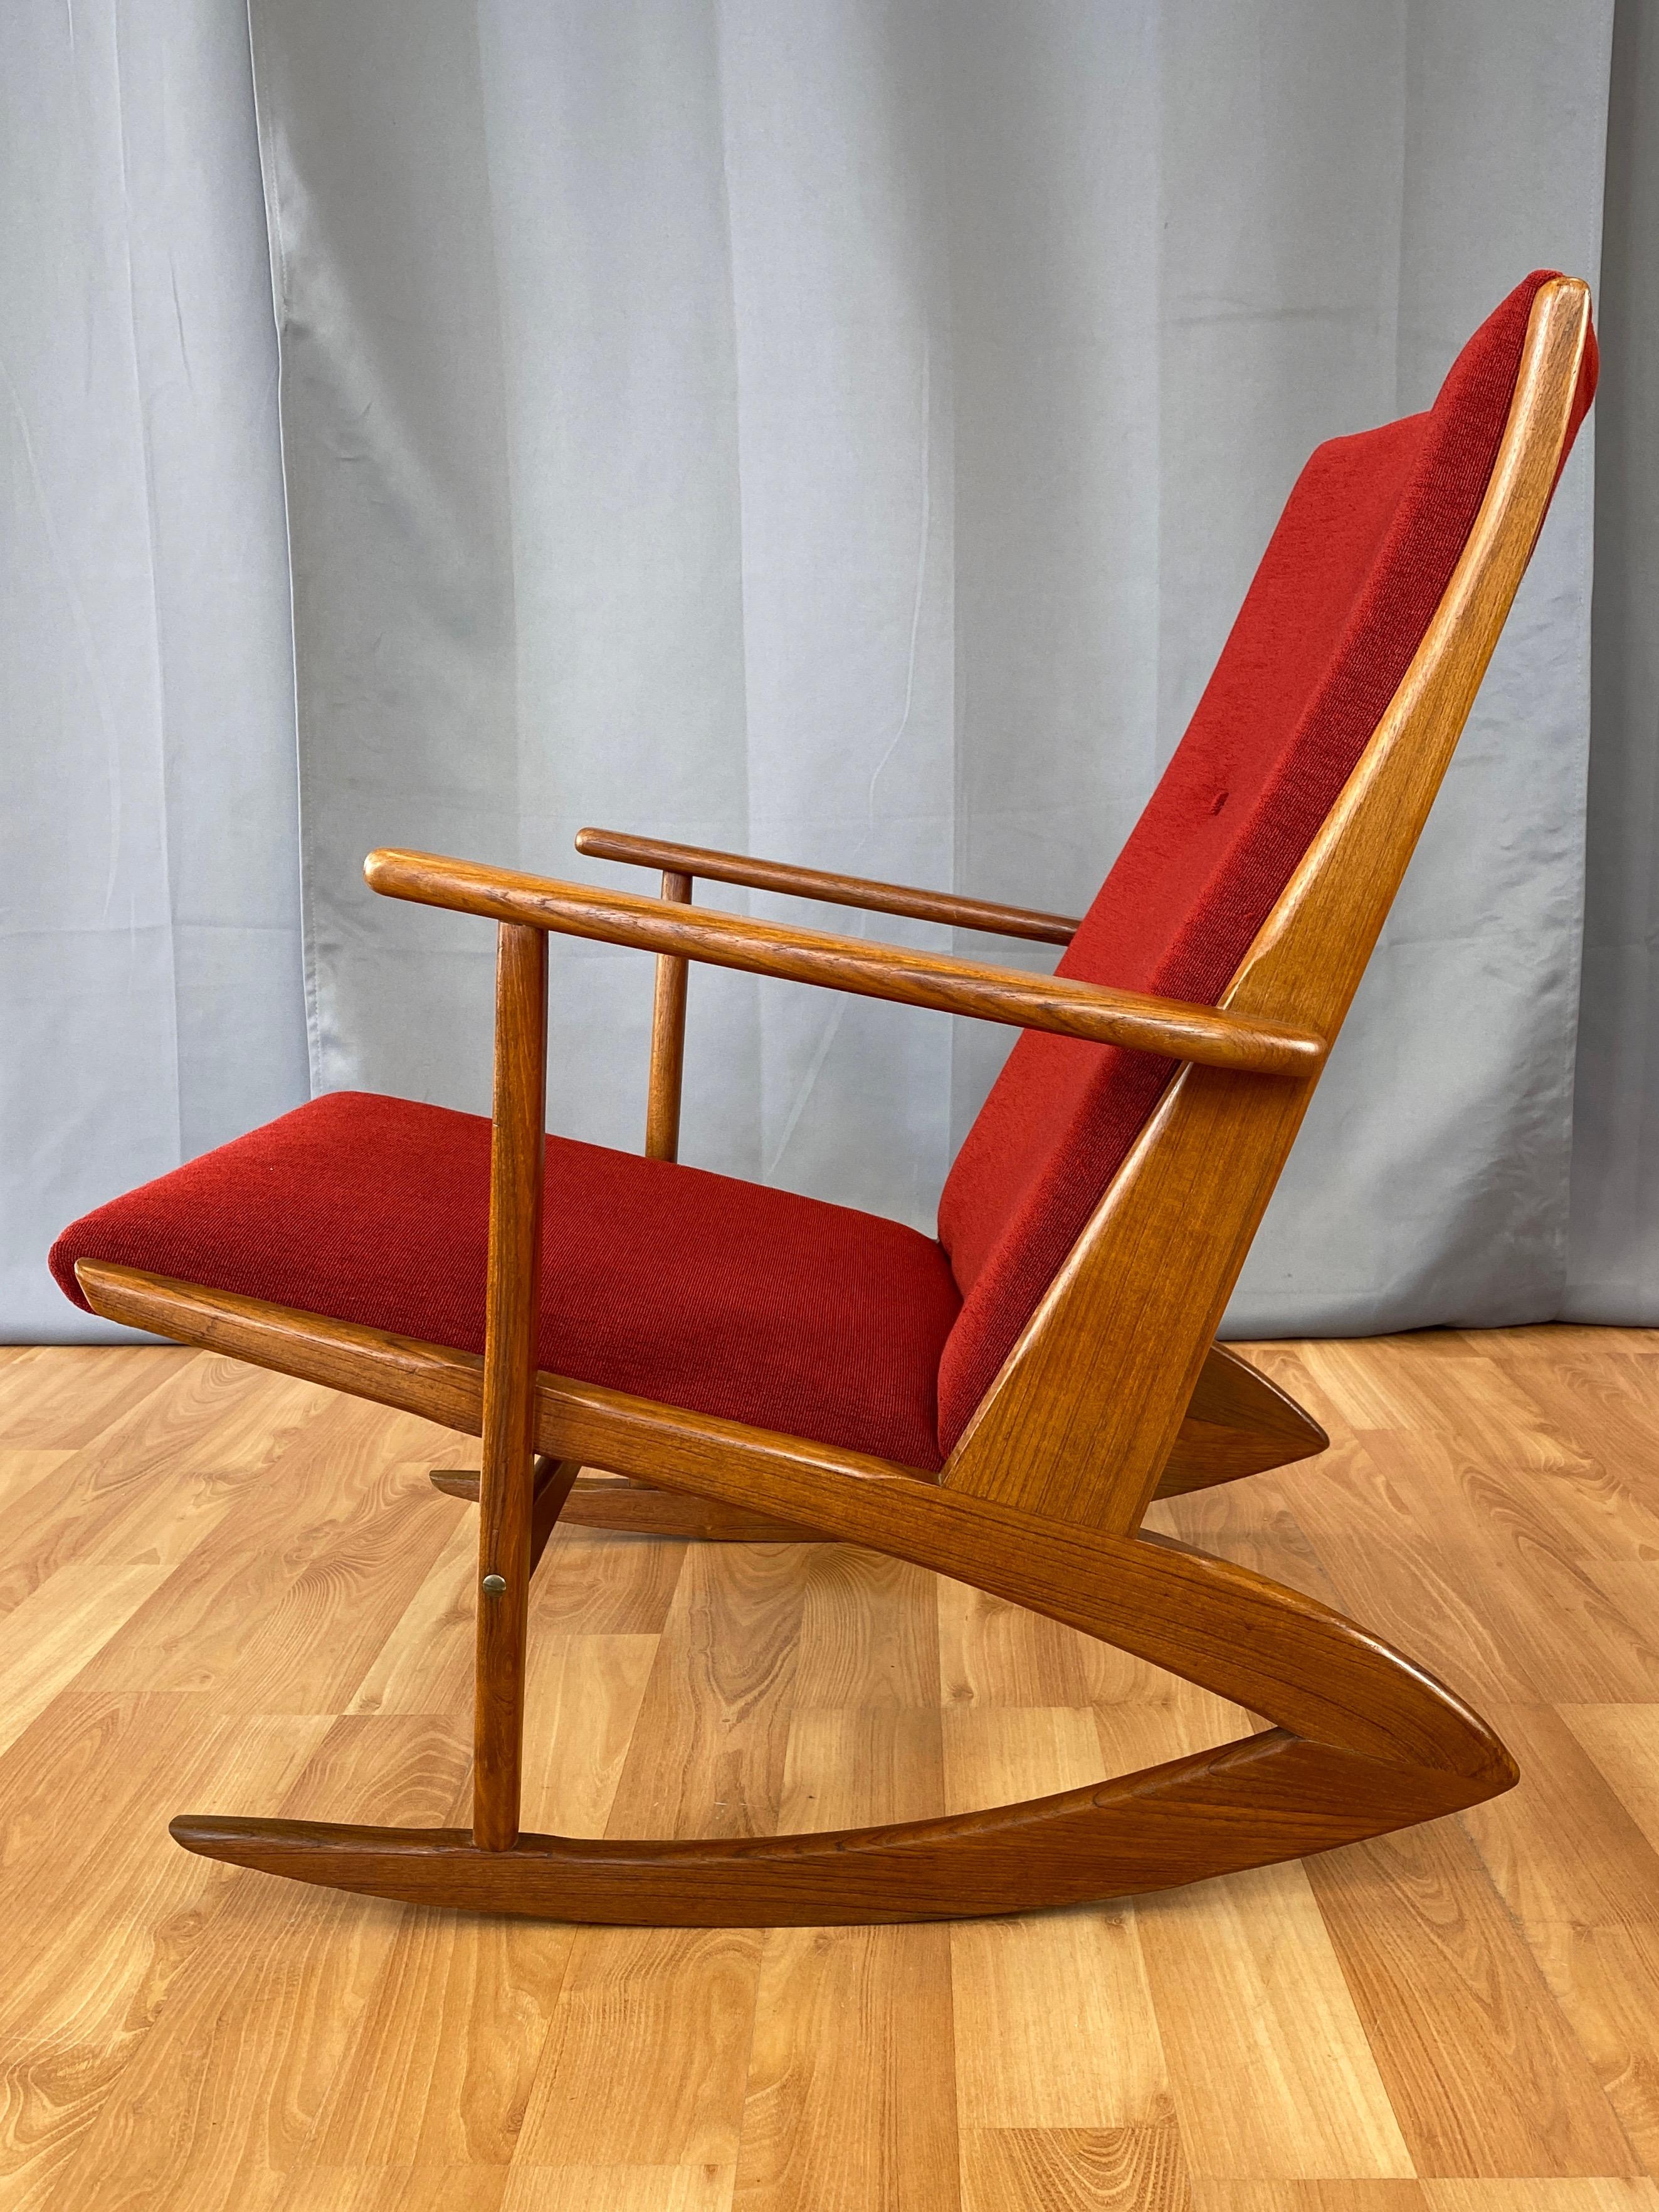 A fantastic Danish modern Model 97 teak rocking chair designed in 1958 by Holger Georg Jensen for Tønder Møbelværk, freshly dressed in vintage red upholstery. Piece pre-dates Jensen’s work done for Kubus in the early-to-mid-1960s.

Gorgeous